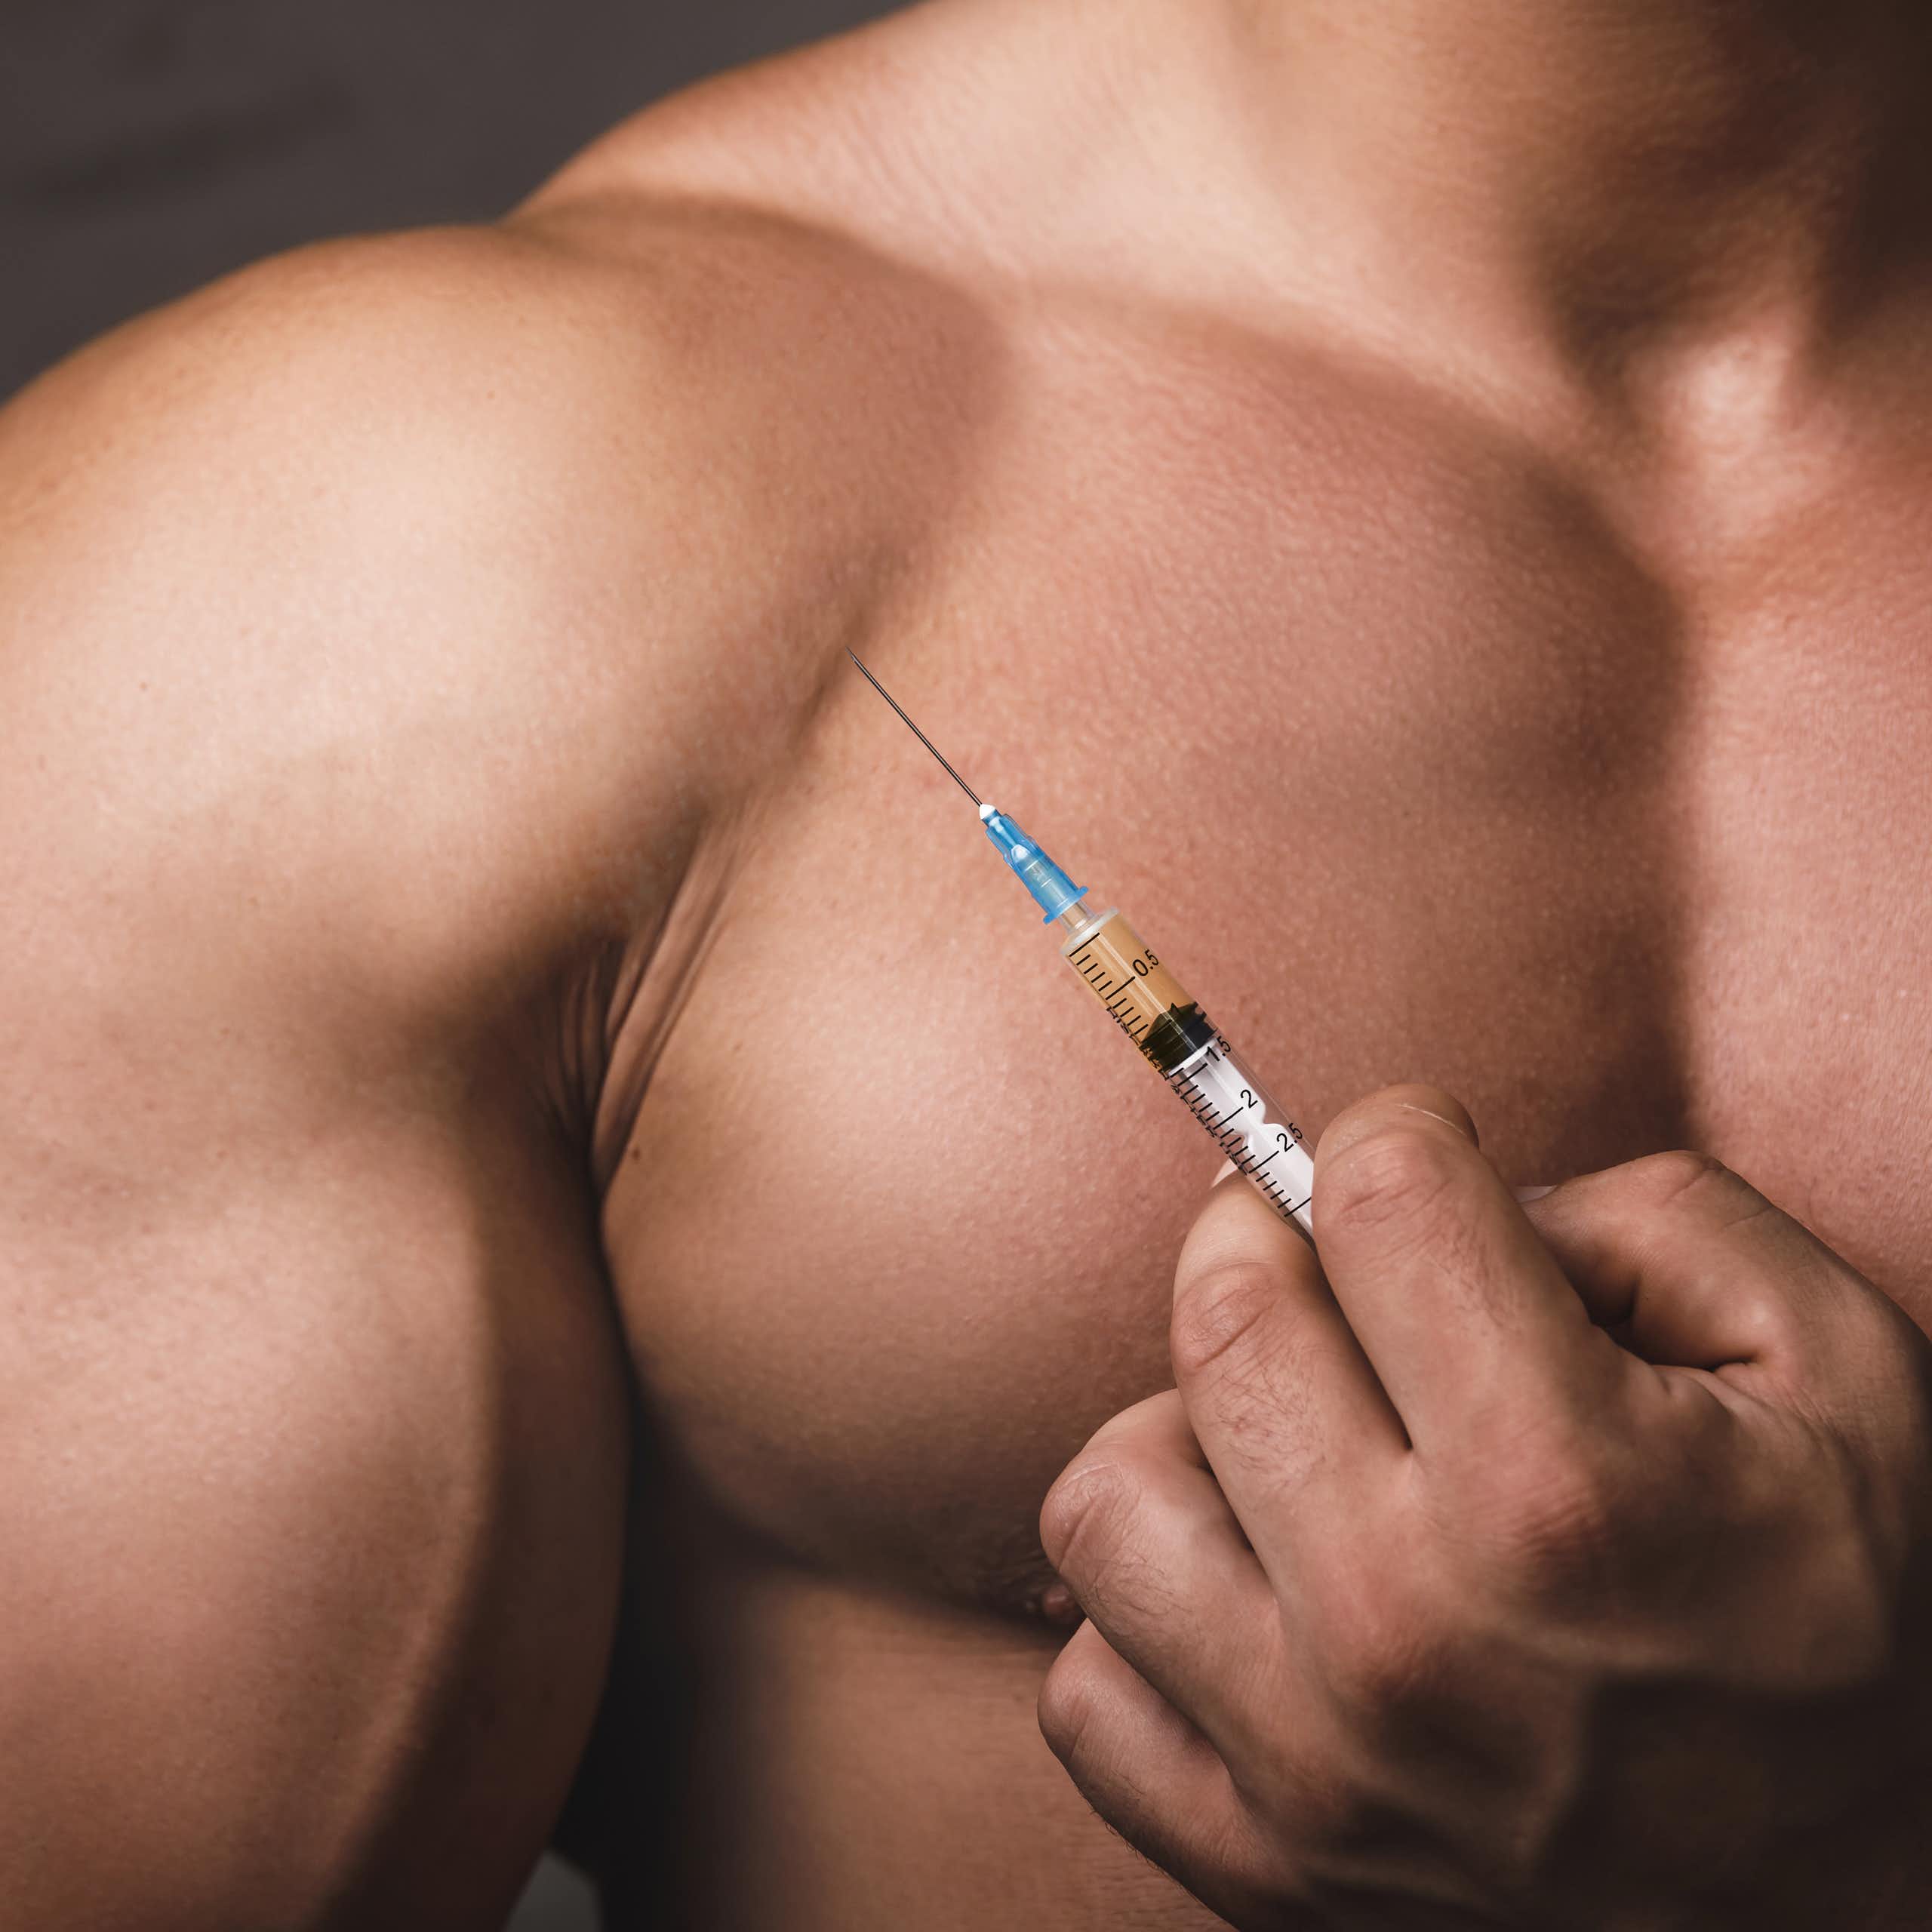 A muscular man holds a medical syringe.